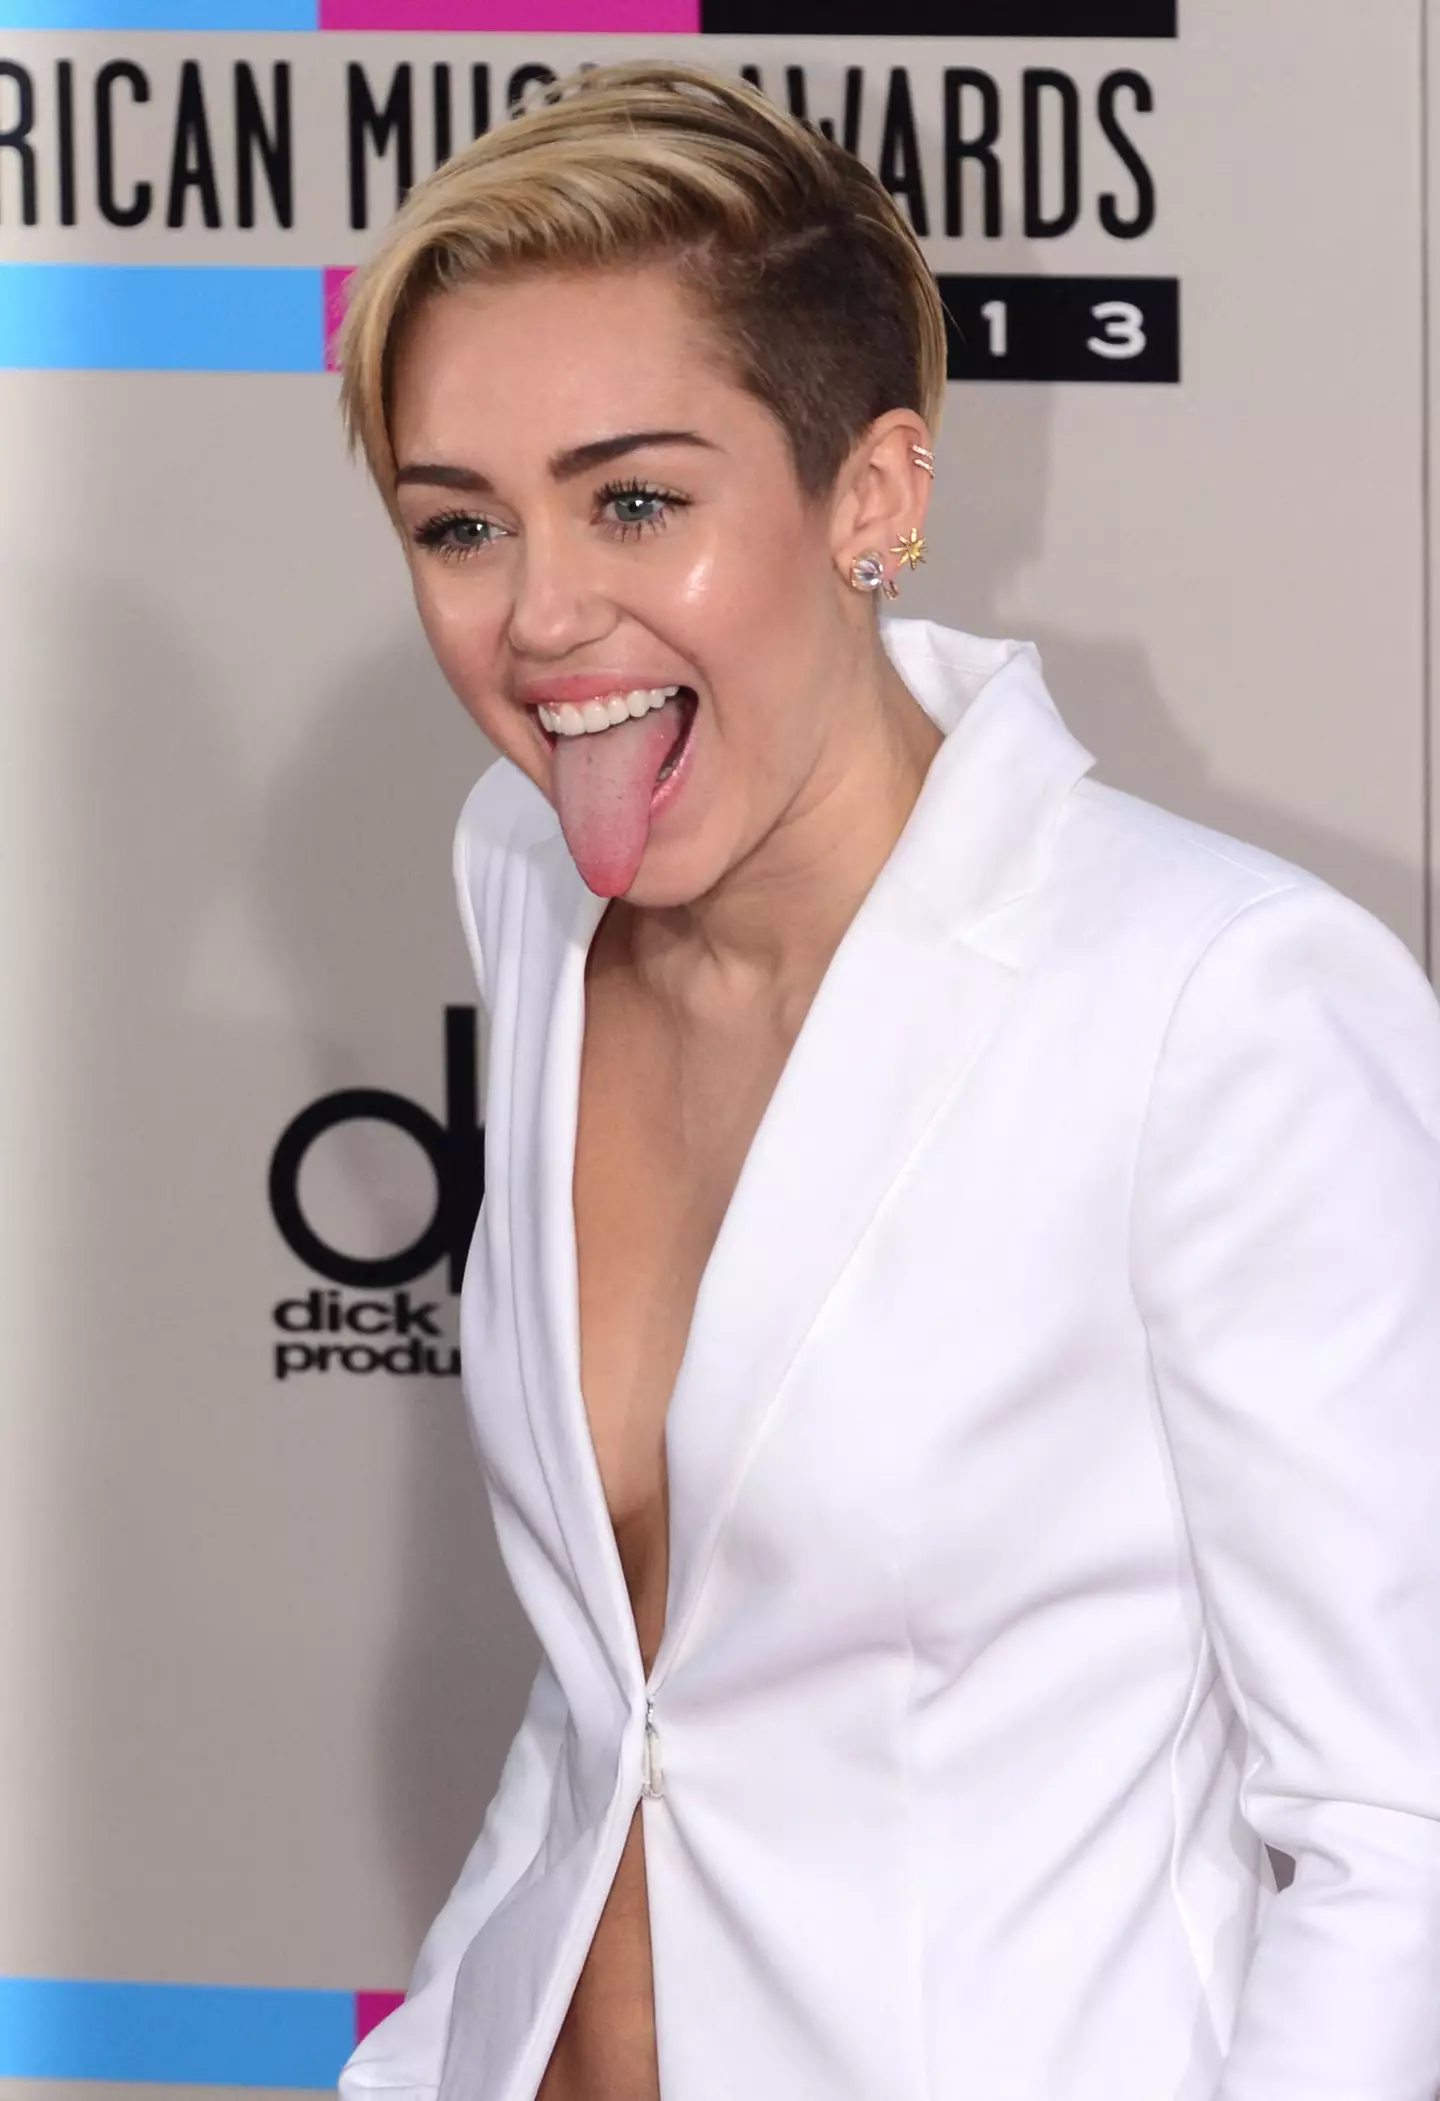 Miley Cyrus likes sticking her tongue out.